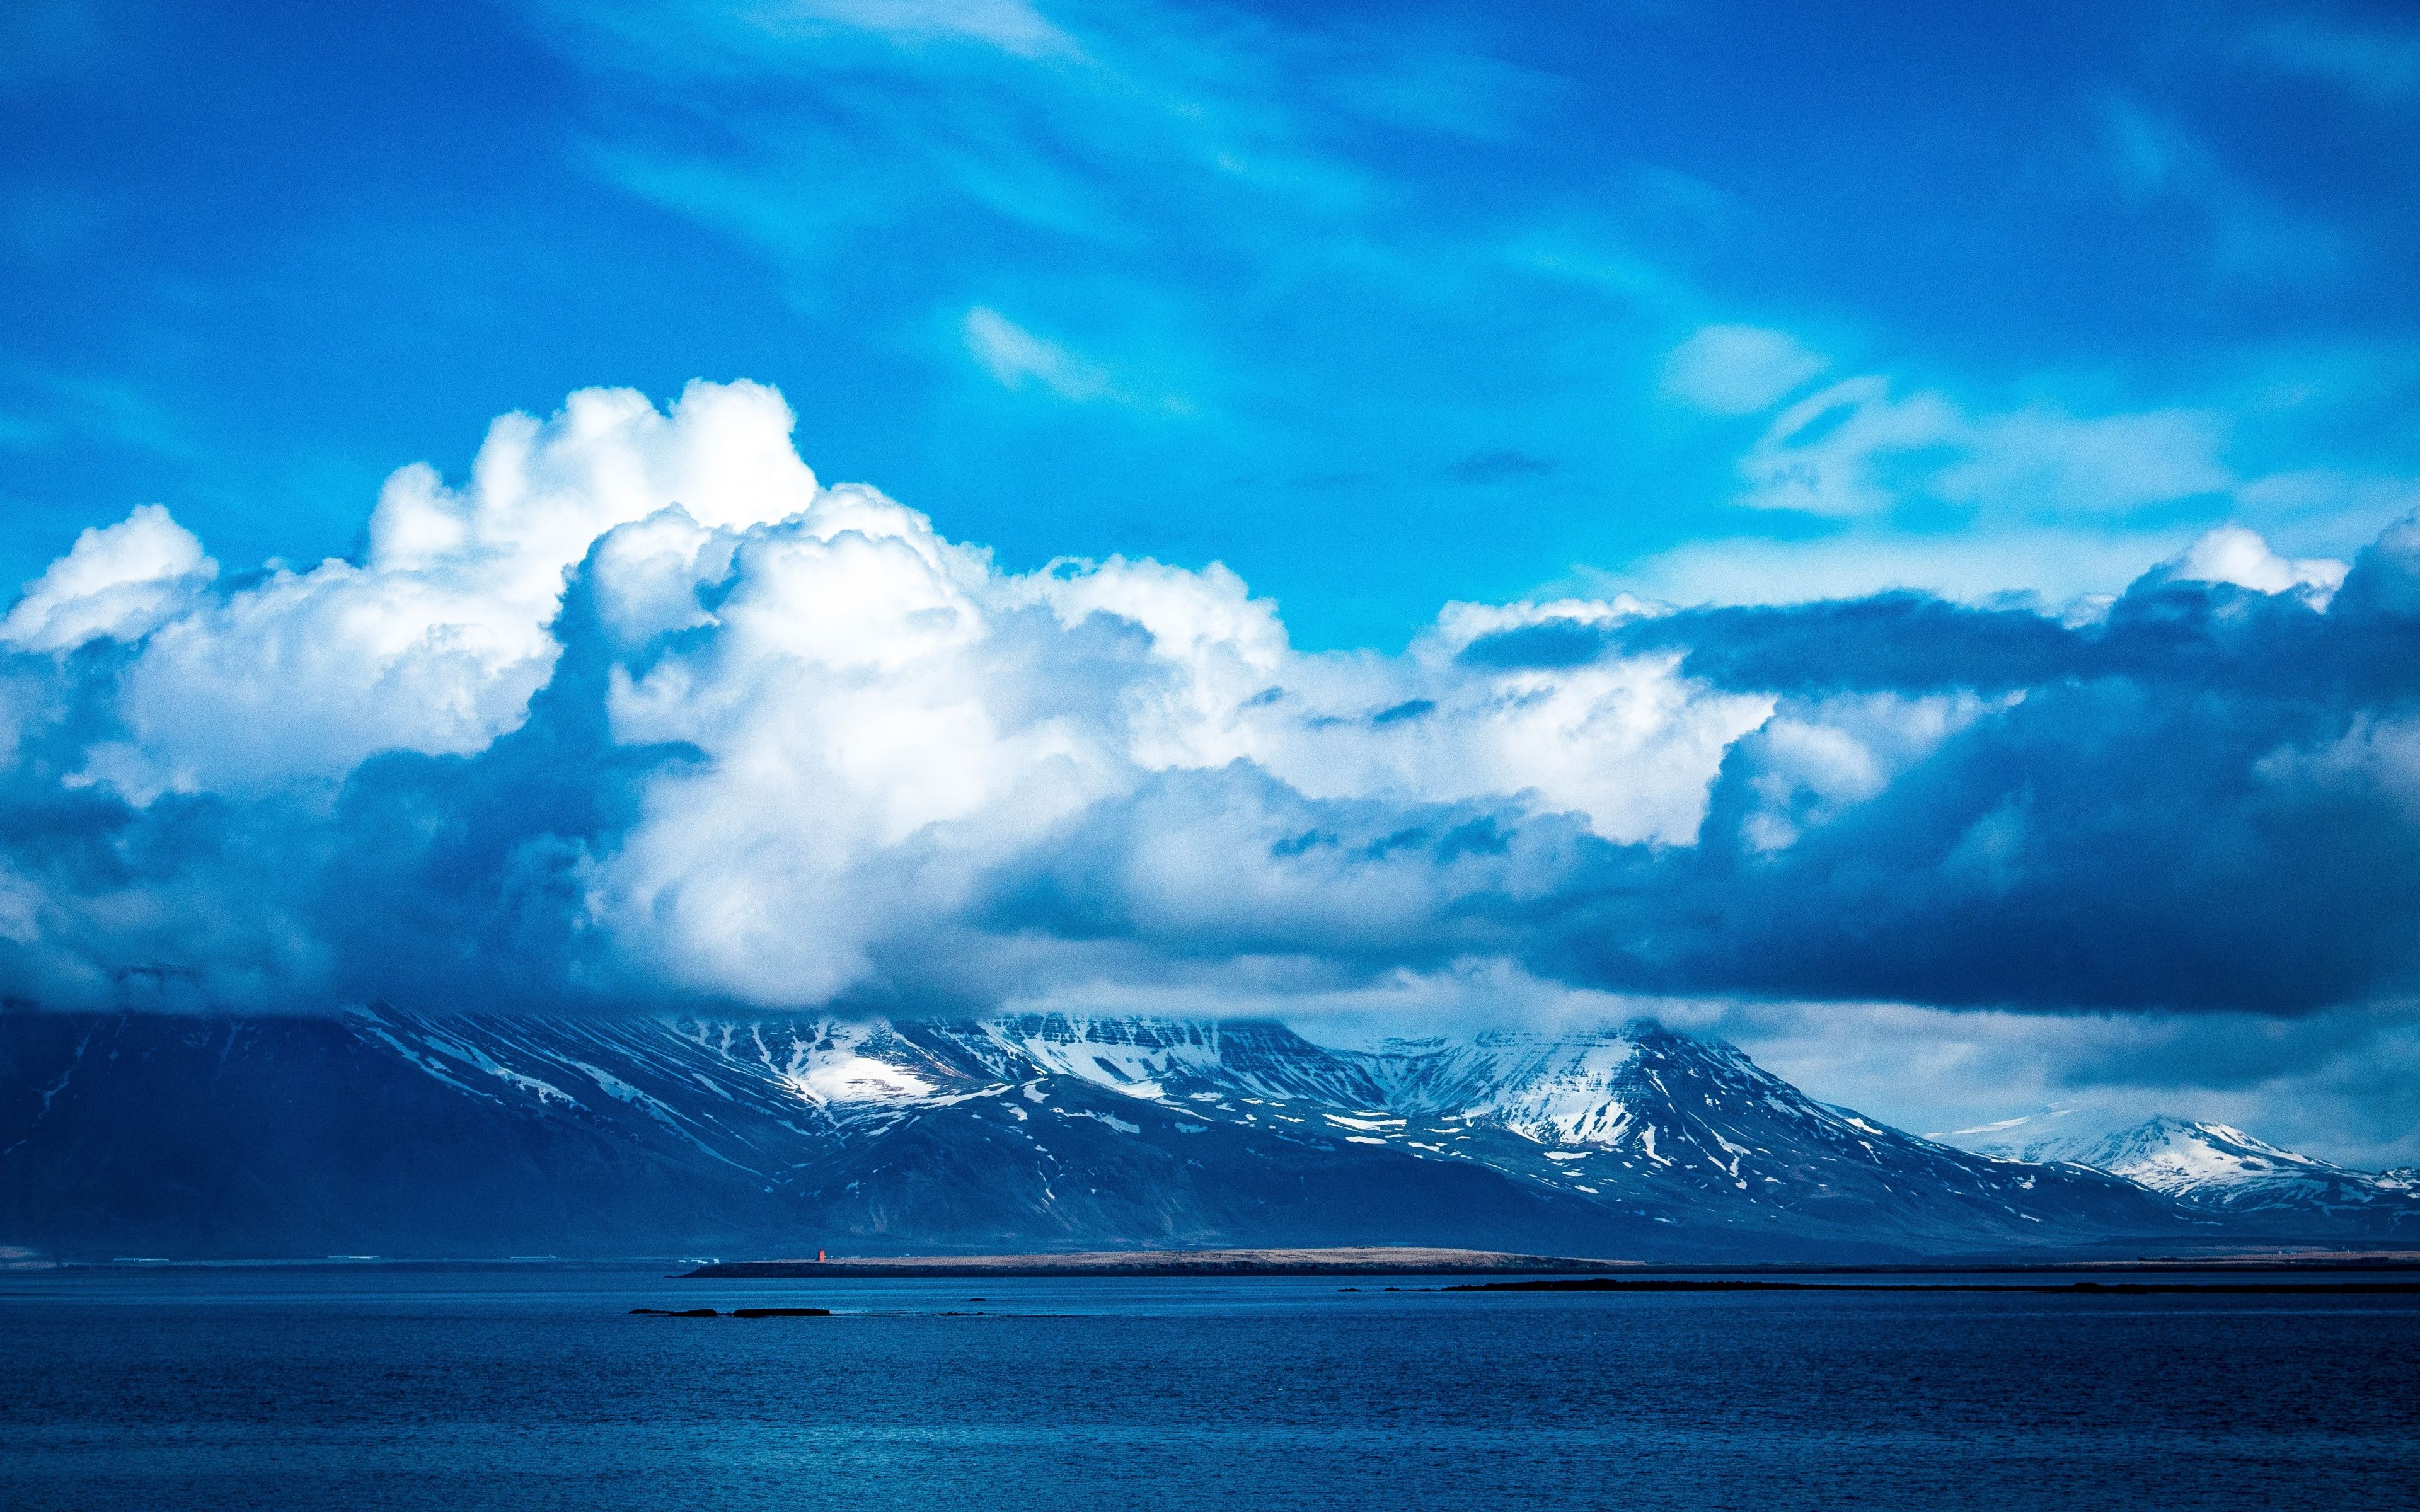 Blue Sky, Clouds, Mountains, Winter, Sea, Nature, Wallpapers